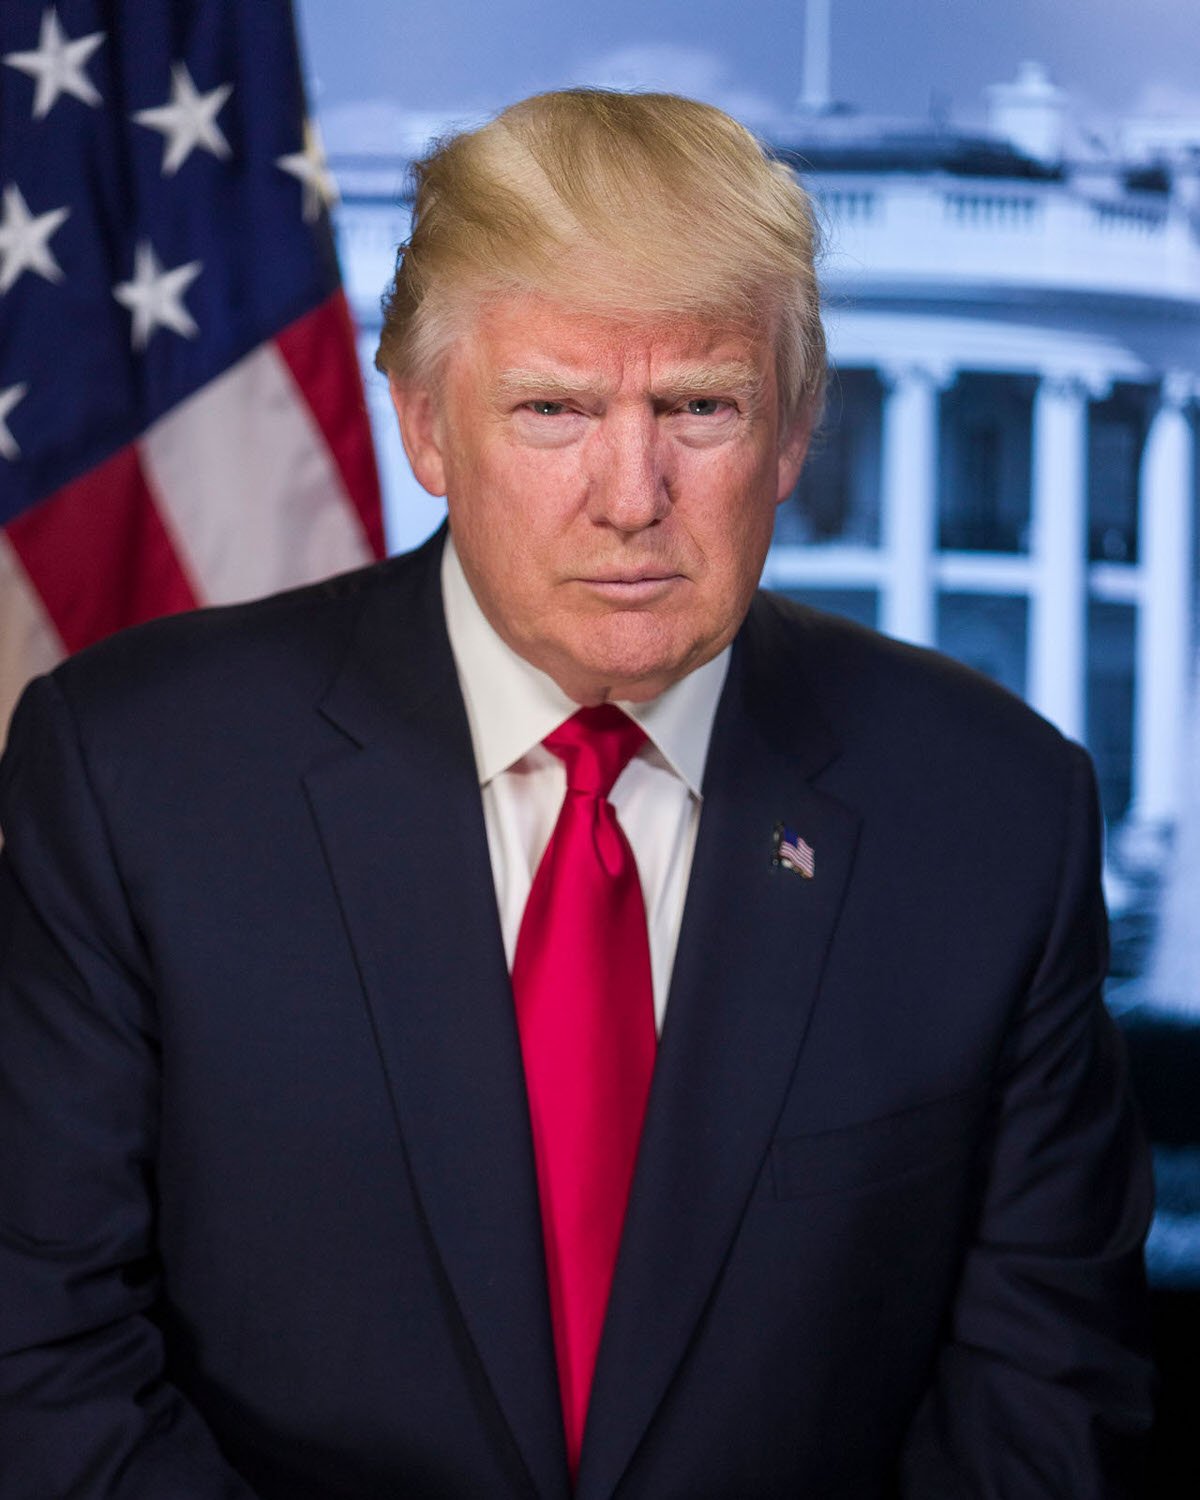 This is President Trumps Official Portrait